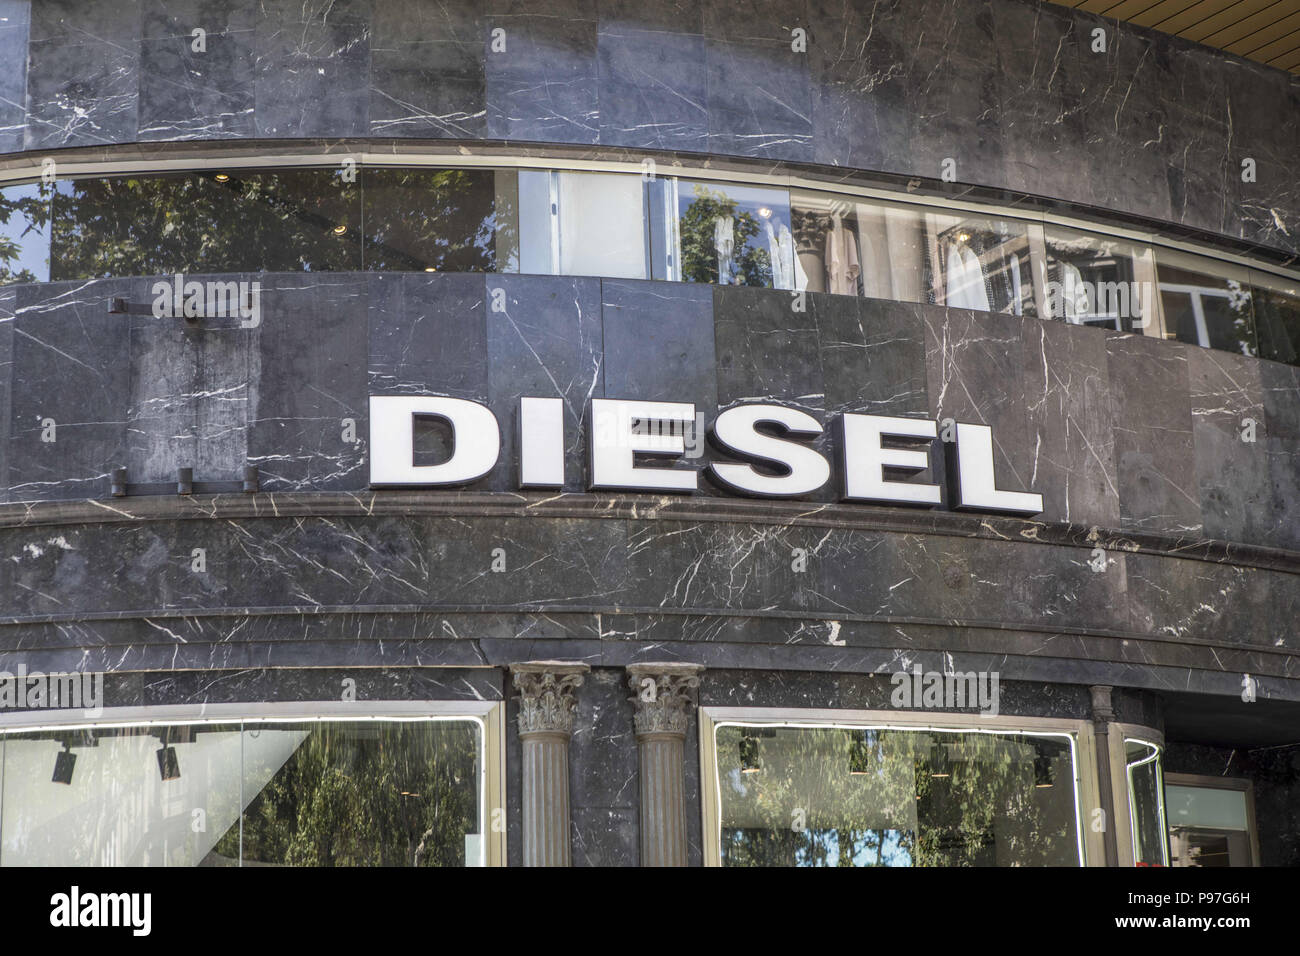 Barcelona, Barcelona, Spain. 12th July, 2018. Diesel sign on Passeig de GrÃ cia street in Barcelona.Barcelona is a city in Spain. It is the capital and largest city of Catalonia, as well as the second most populous municipality of Spain. In 2009 the city was ranked Europe's third and one of the world's most successful as a city brand. In the same year the city was ranked Europe's fourth best city for business and fastest improving European city, with growth improved by 17% per year, and the city has been experiencing strong and renewed growth for the past three years. (Credit Image: © Victor Stock Photo